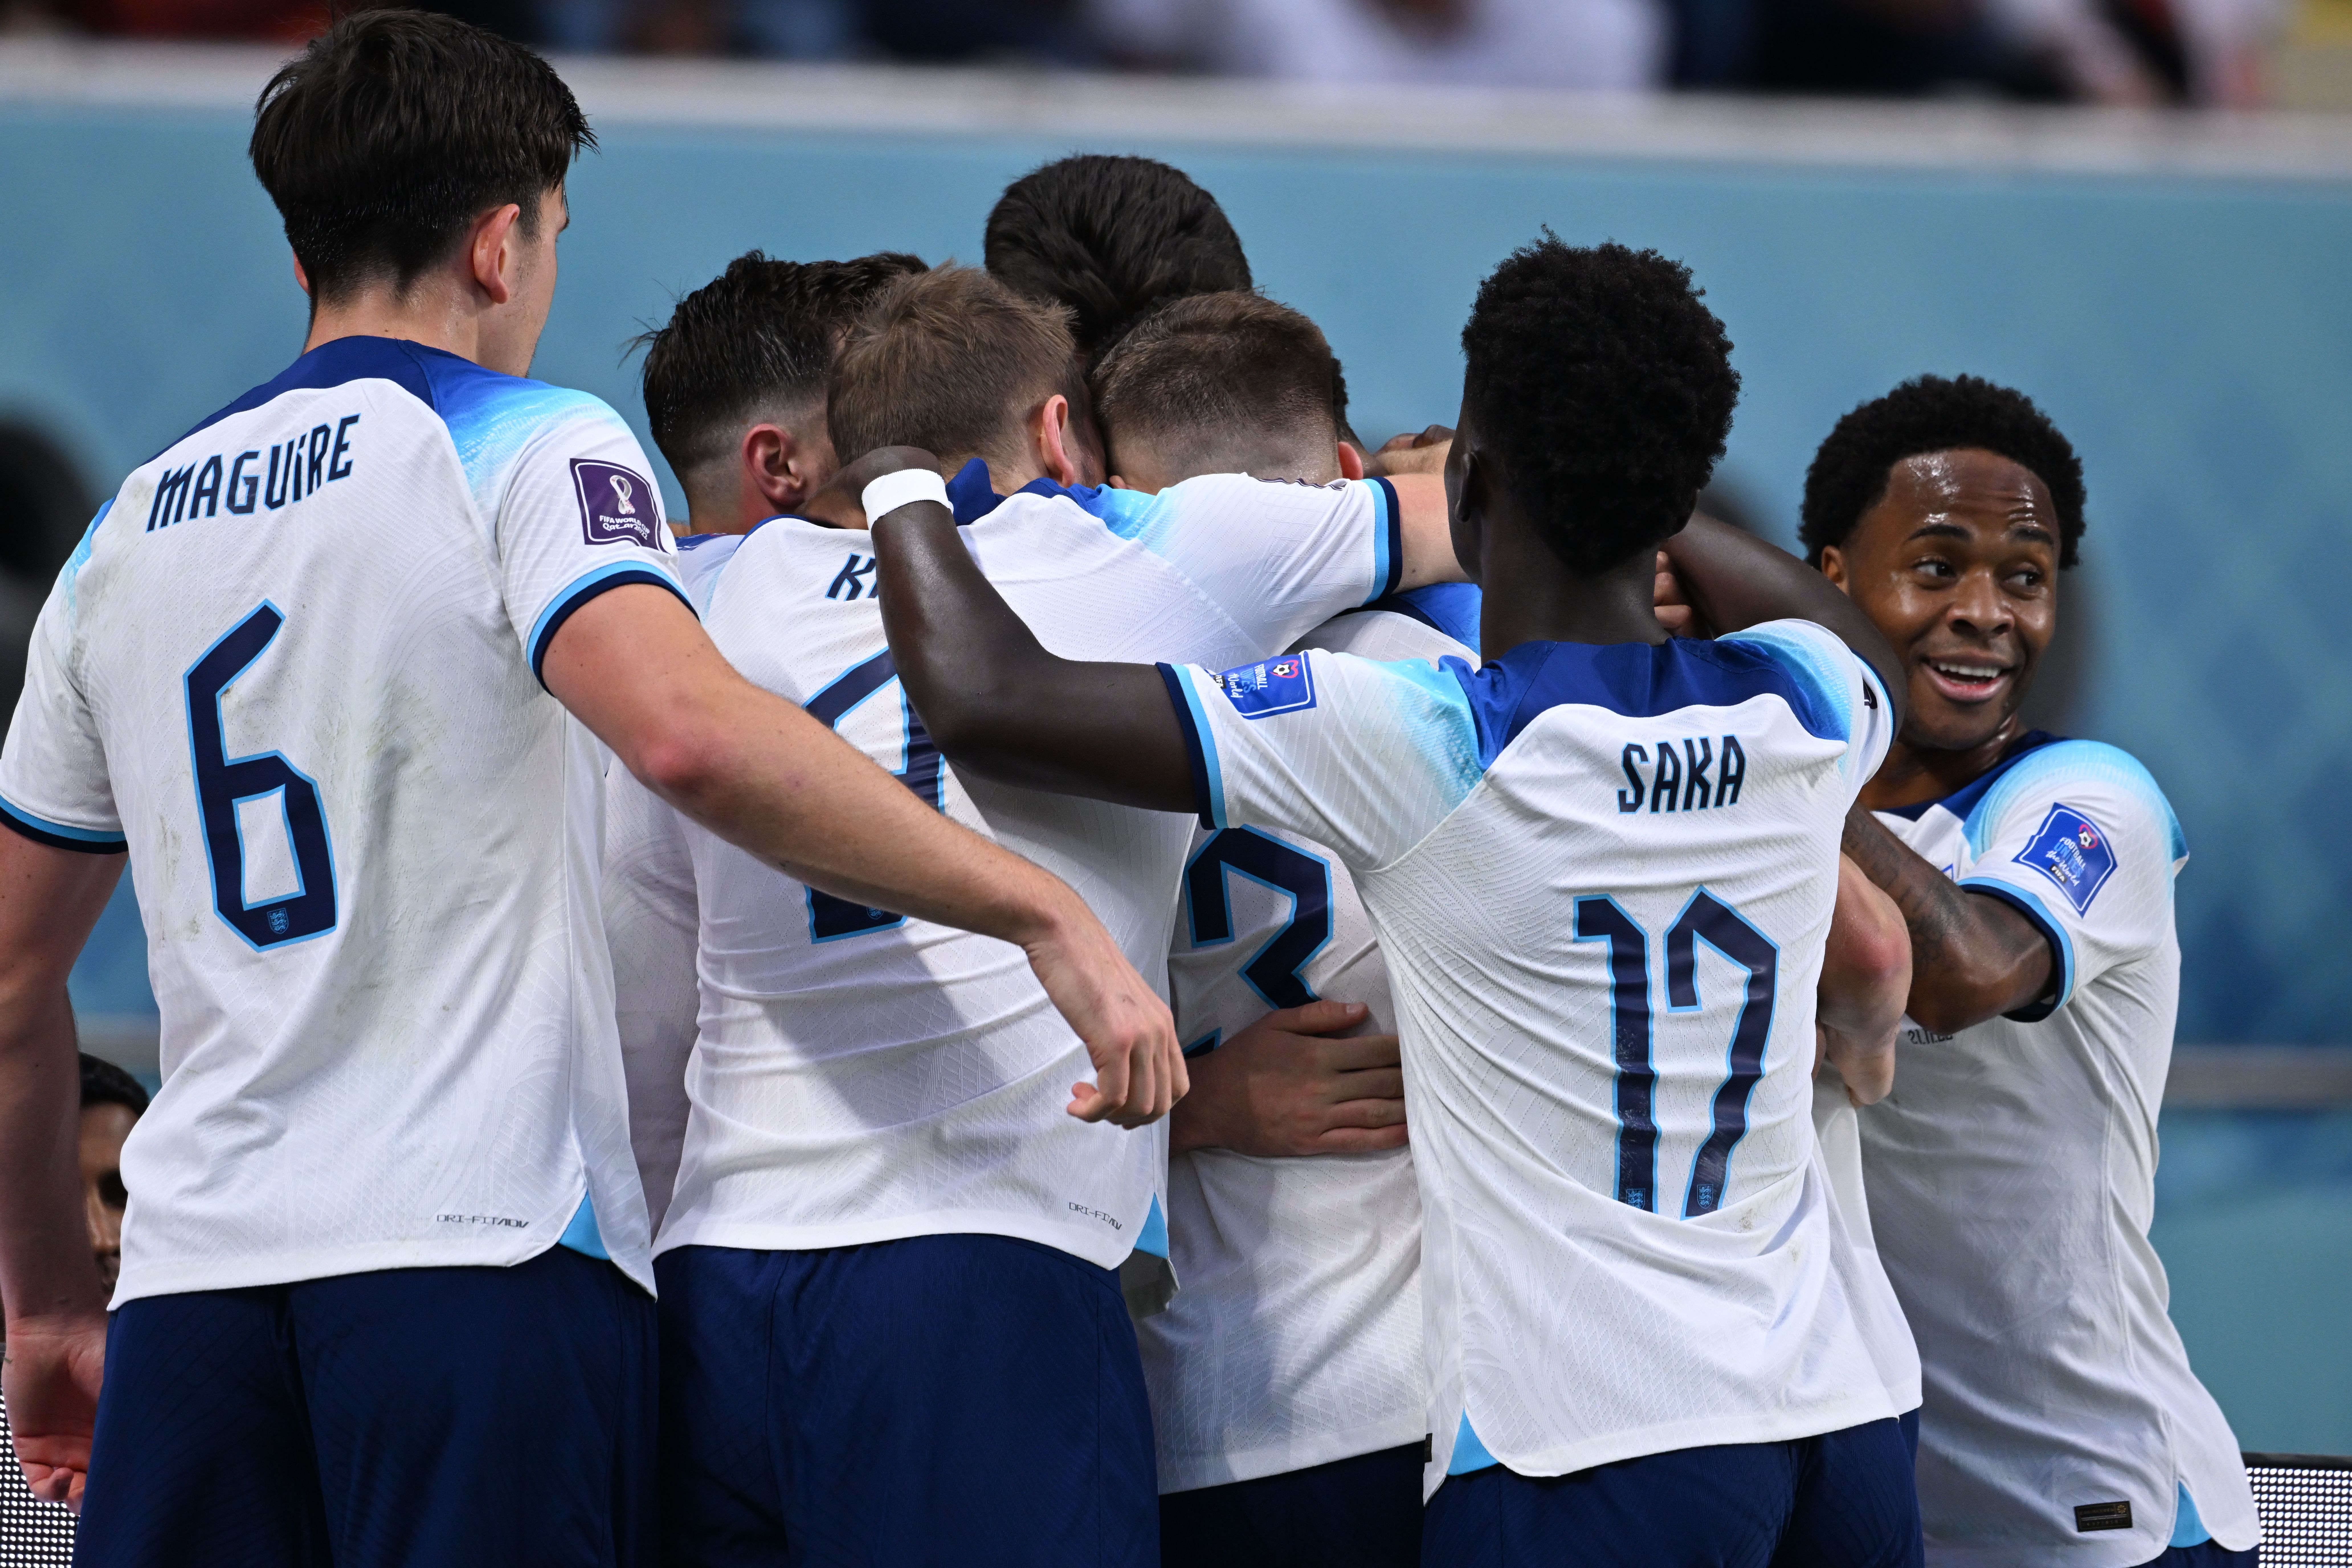 England's' Harry Maguire (DF) 6, Harry Kane (FW) 9, Luke Shaw (DF) 3, Bukayo Saka (FW) 17, and Raheem Sterling (FW) 10, celebrate a goal during the FIFA World Cup in November 2022